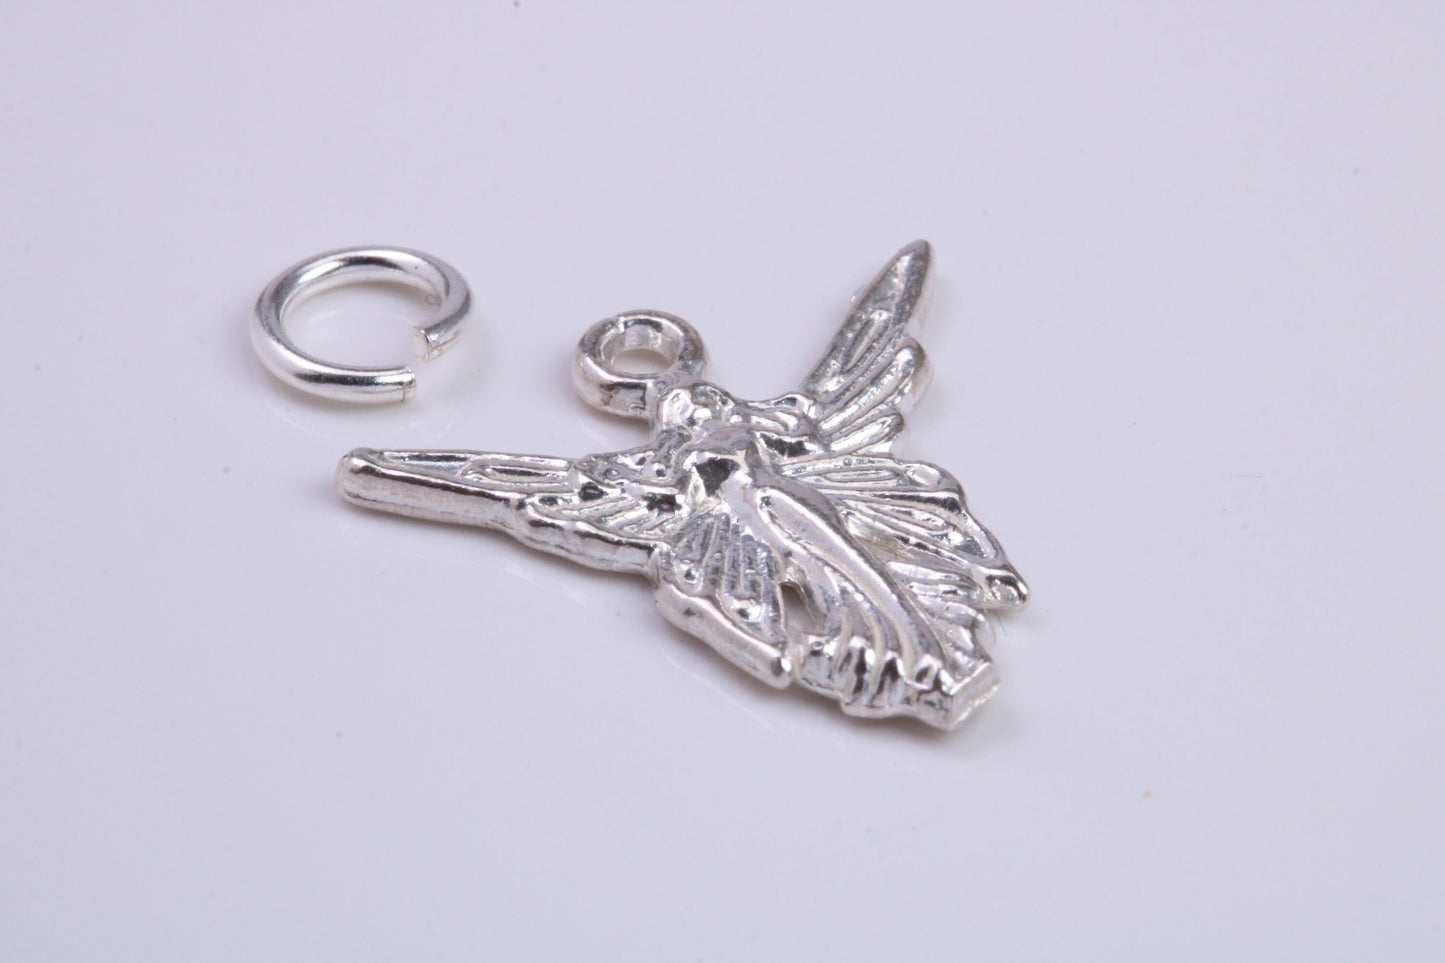 Angel / Fairy Charm, Traditional Charm, Made from Solid 925 Grade Sterling Silver, Complete with Attachment Link